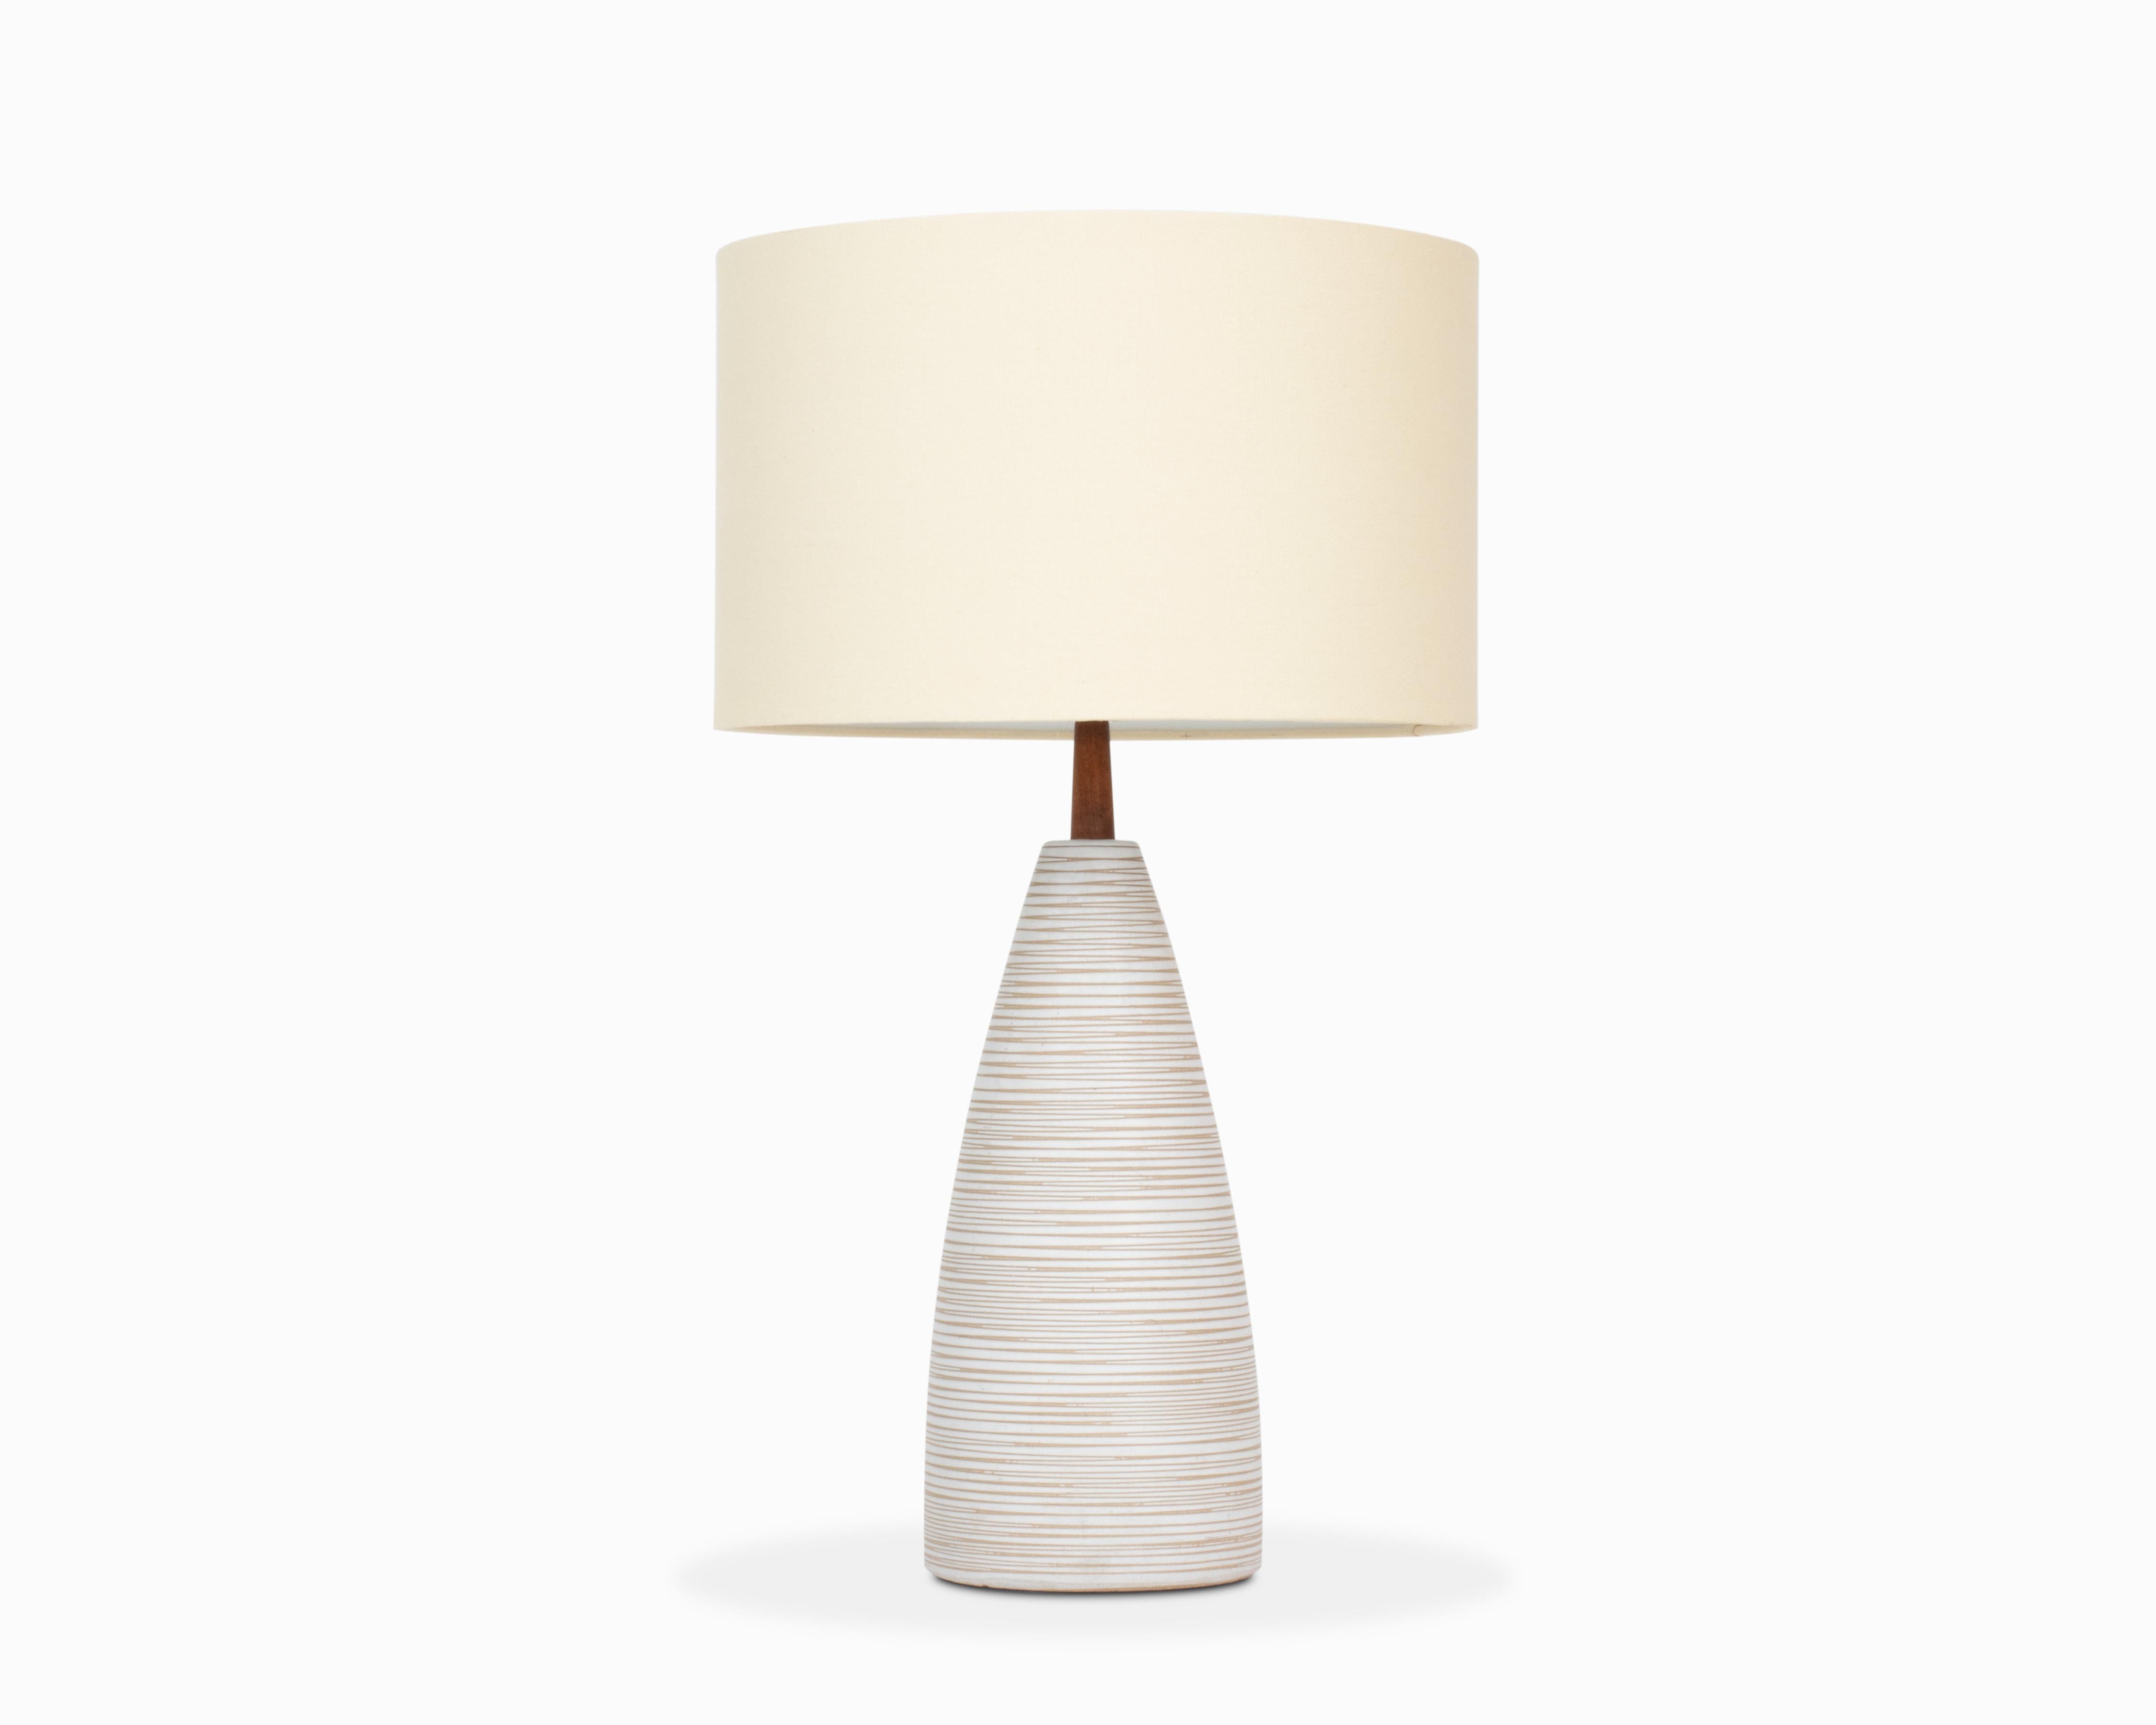 Here is a beautiful ceramic table lamp by Jane and Gordon Martz / Marshall Studios. Model M53-28-1. It features a unique conical shape in a neutral matte white color with elegant striped incising. The lamp is in excellent shape with no noteworthy